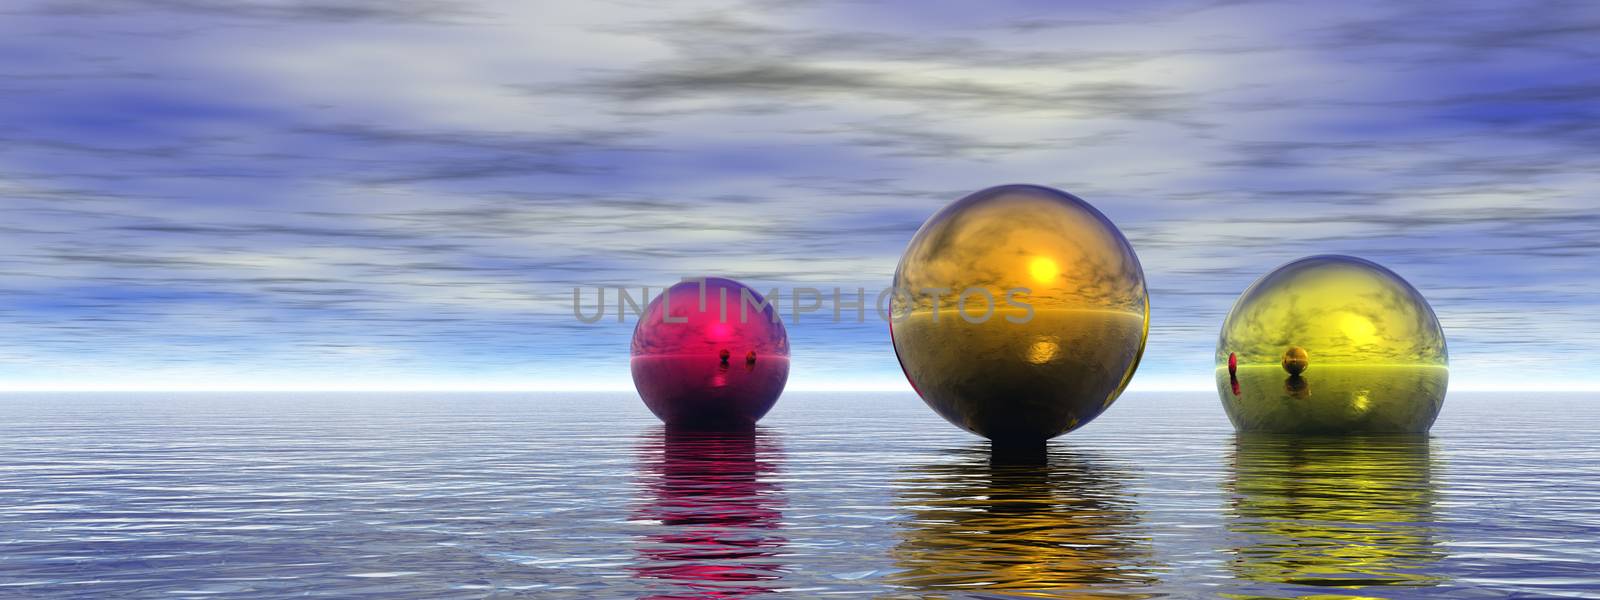 Colorful spheres by applesstock